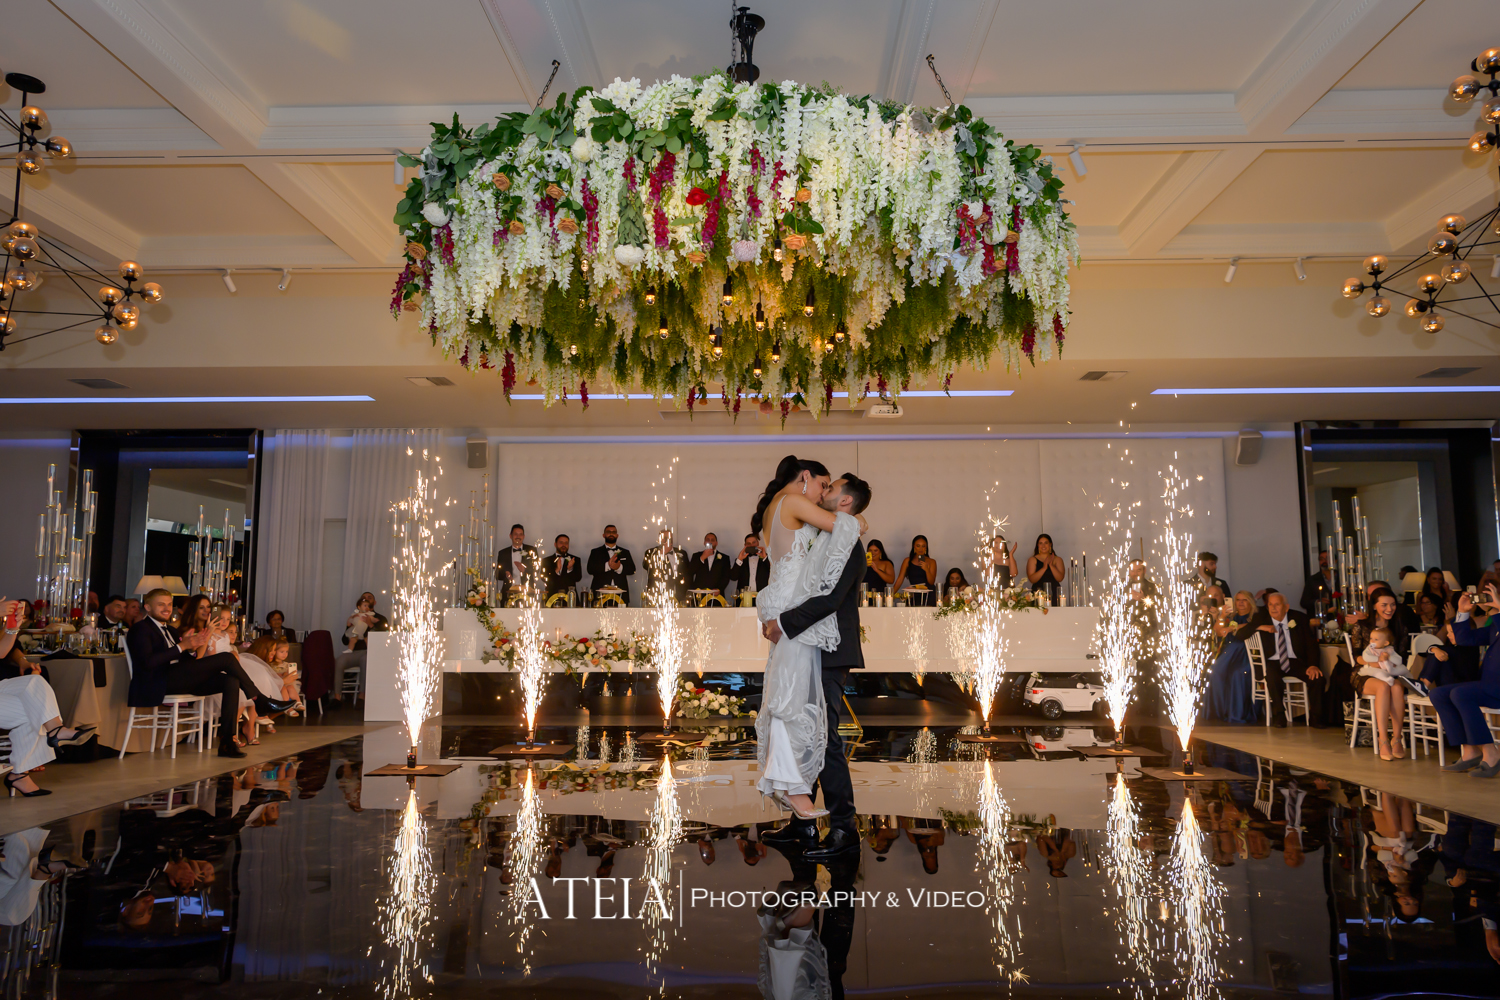 , Meadowbank Receptions Wedding Photography Melbourne by ATEIA Photography &#038; Video